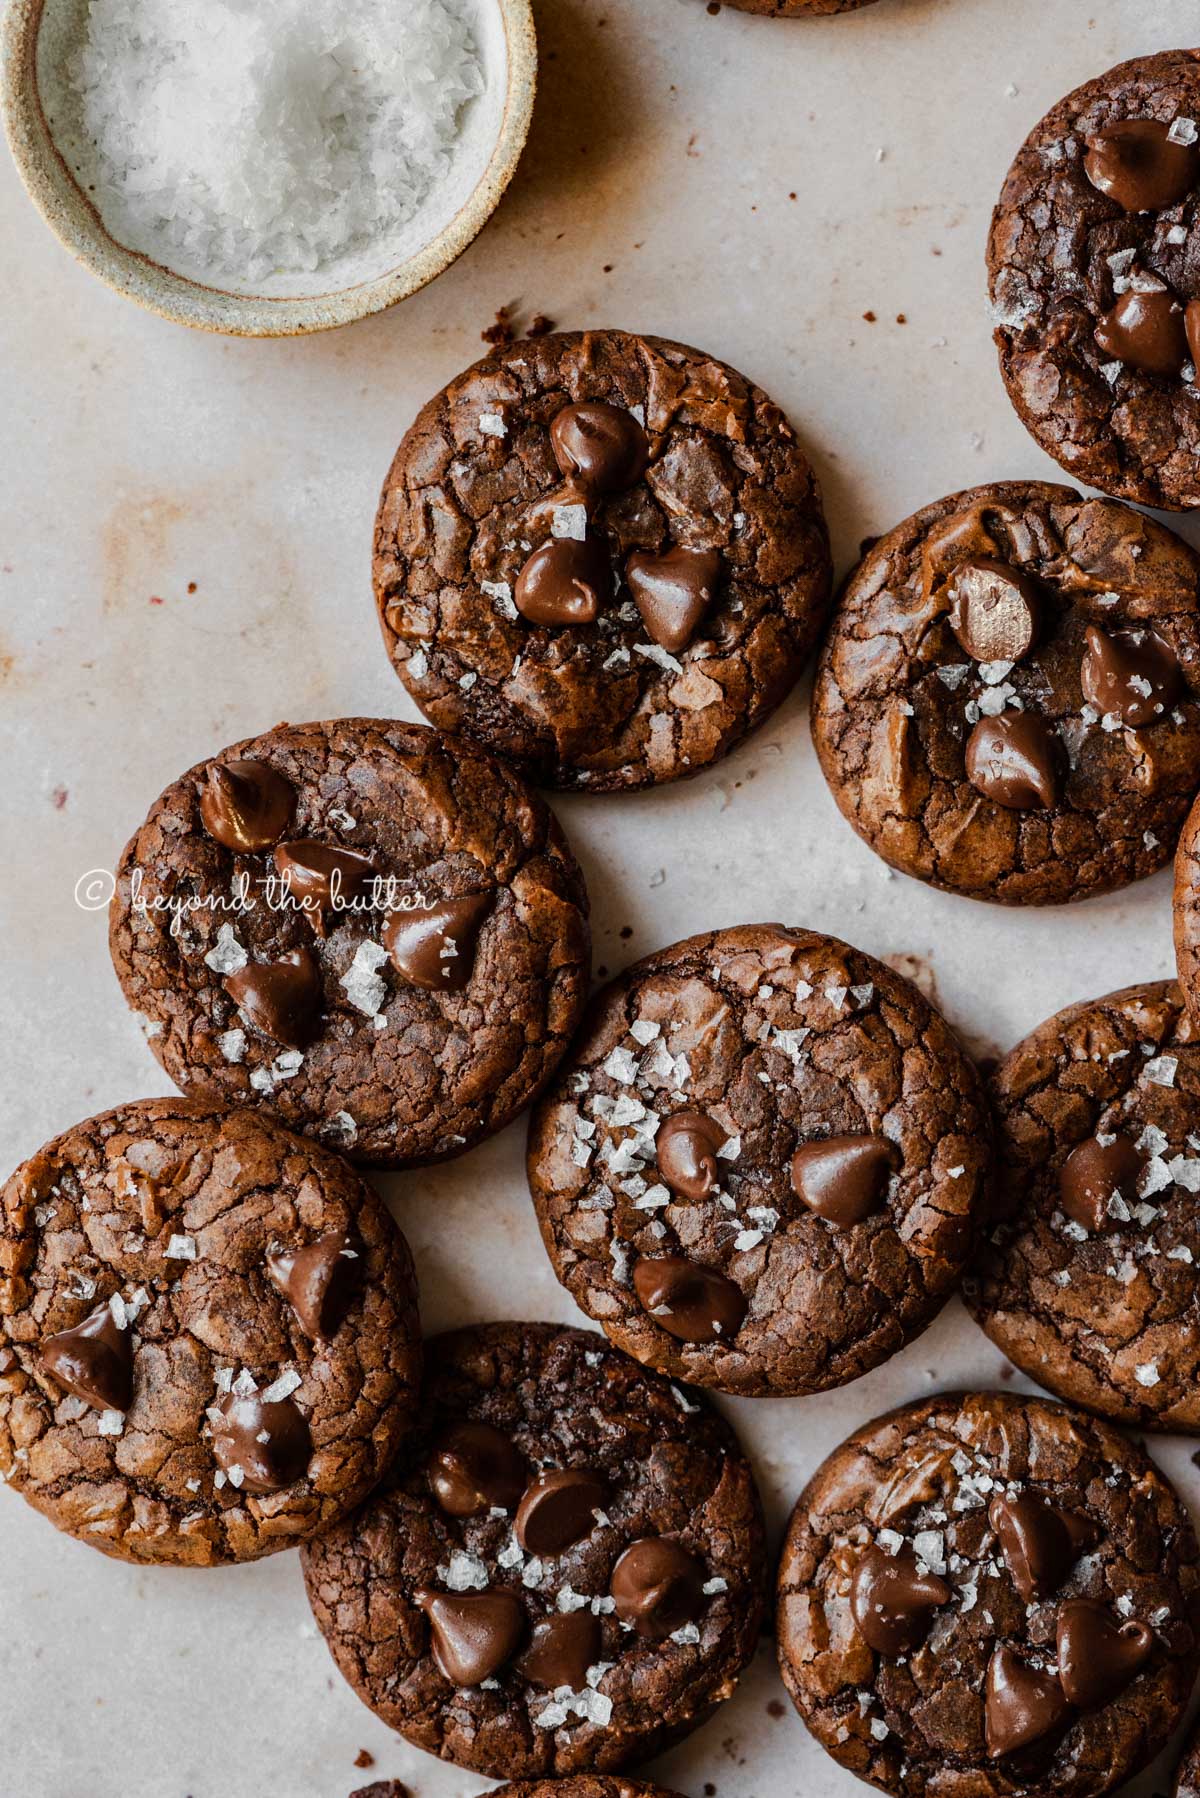 Salted chocolate chip brownie cookies randomly placed on an abstract light brown background with small bowl of sea salt flakes to the side | All Images © Beyond the Butter®